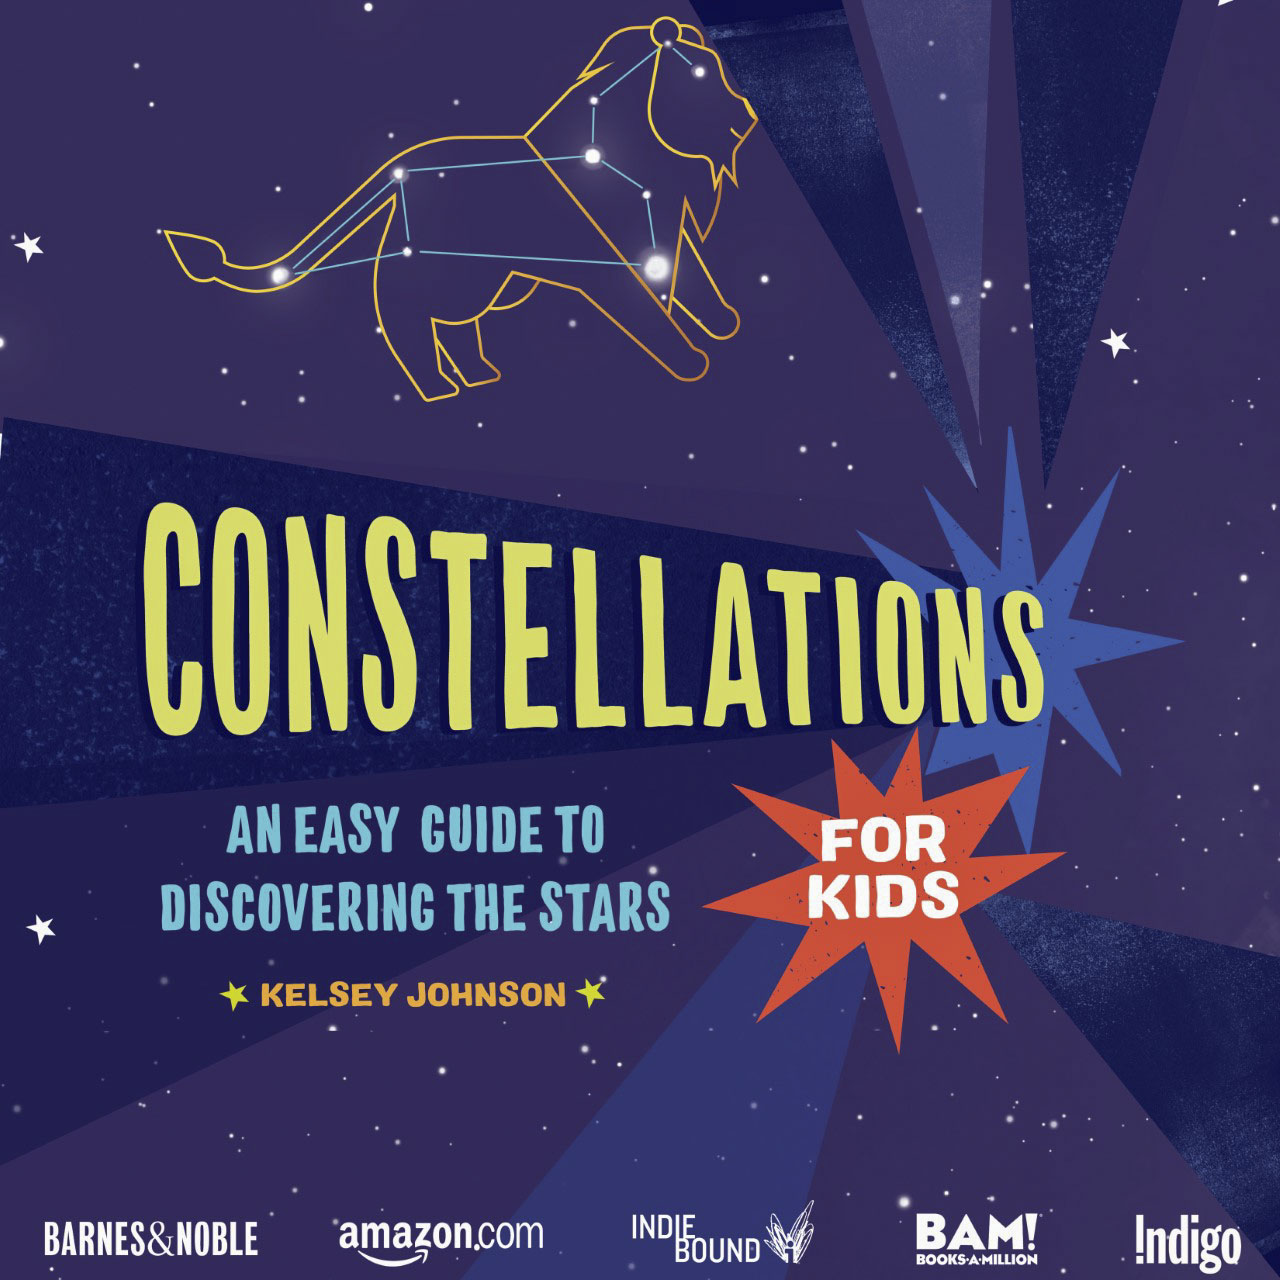 Text: Constellations: an easy guide to discover the starts for kids by kelsey johnson